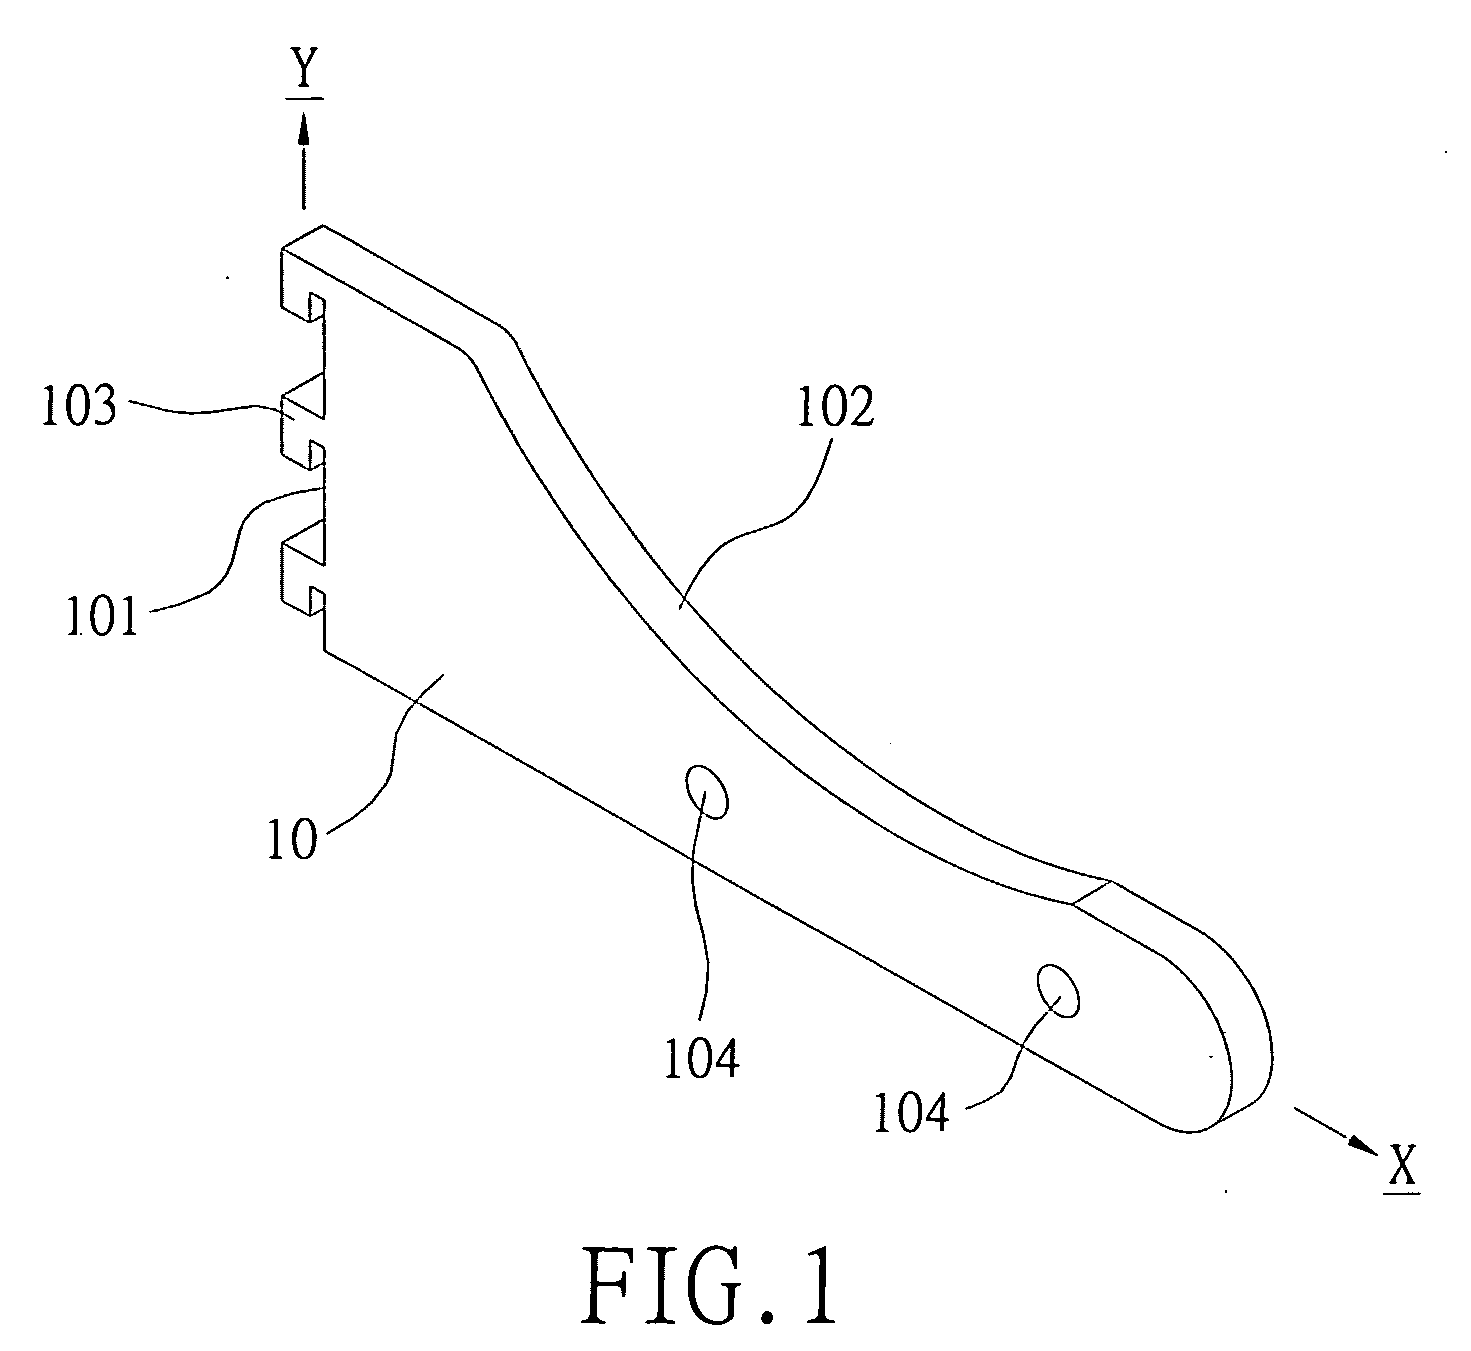 Frame structure for holding a helical hose assembly